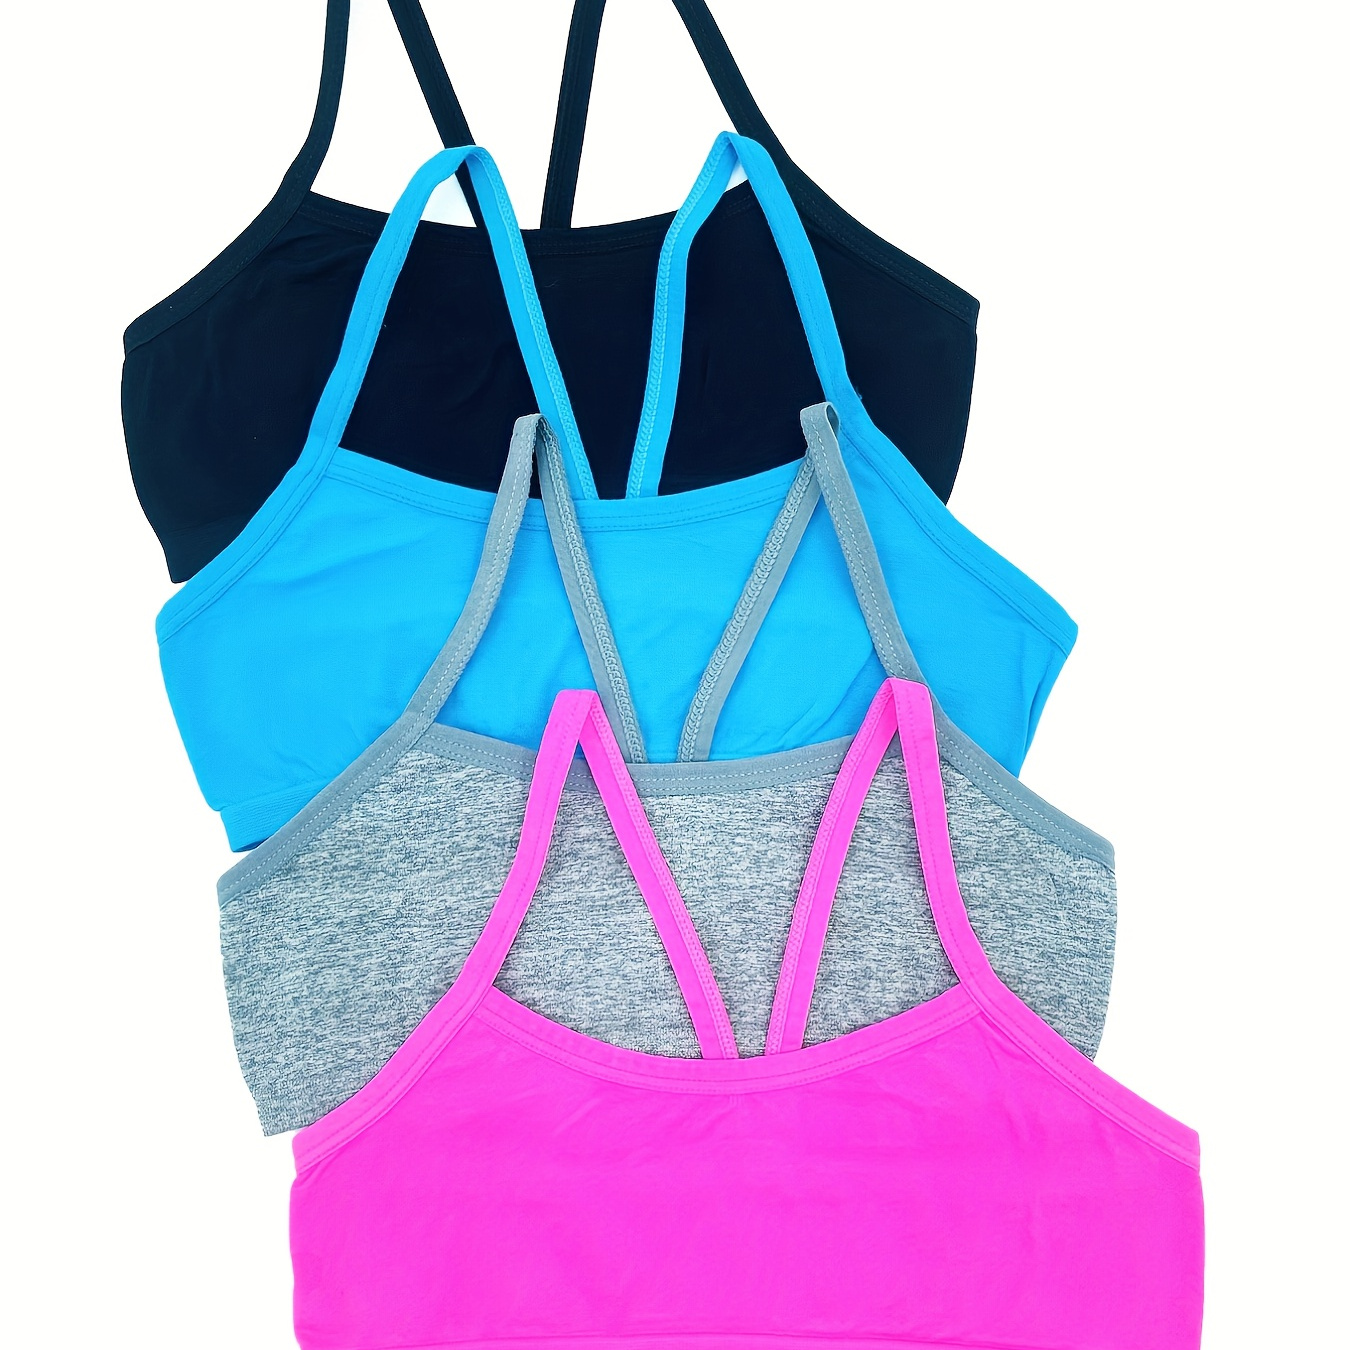 

Holiday Style 4pcs Girls Training Bras Stretchy Sports Bralette Sleeveless Crops Tank Tops Underwears For 6-14 Years Old Kids